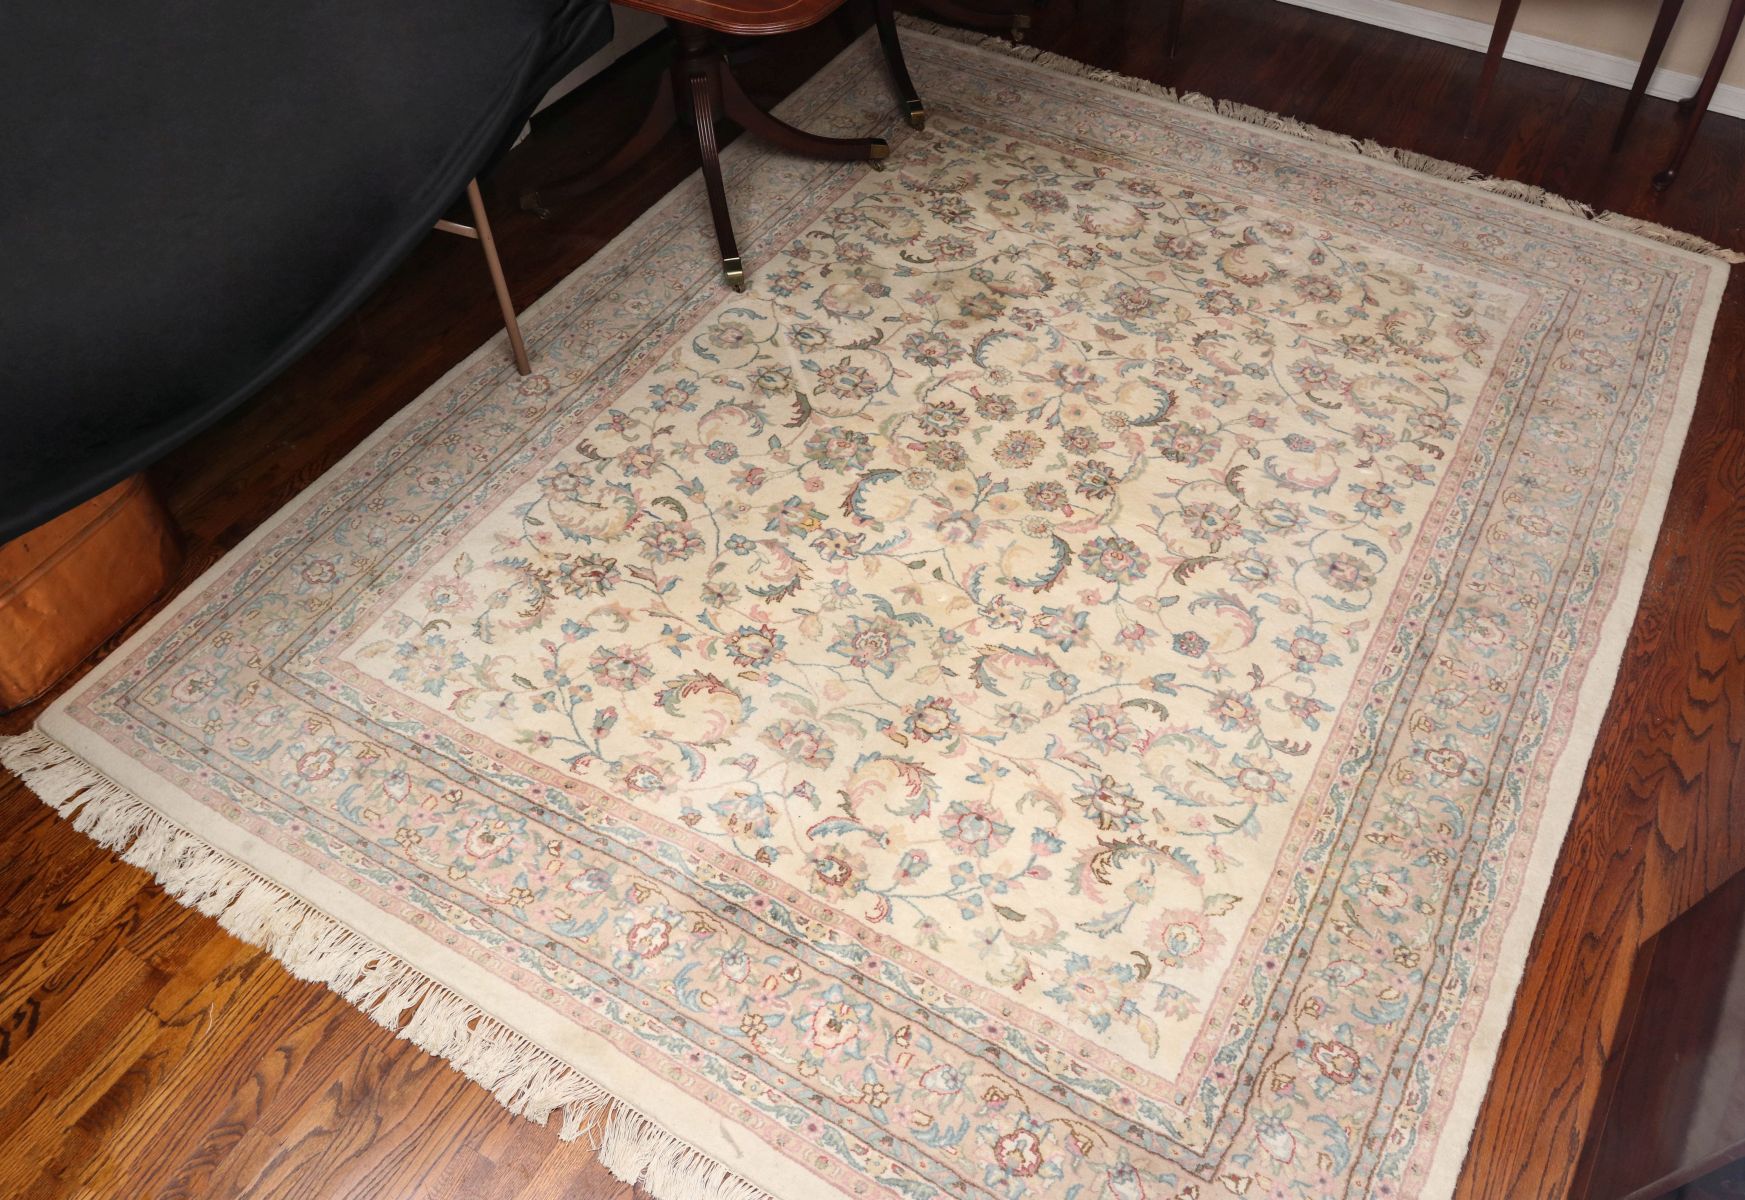 A LATE 20TH CENTURY HAND MADE INDO PERSIAN CARPET